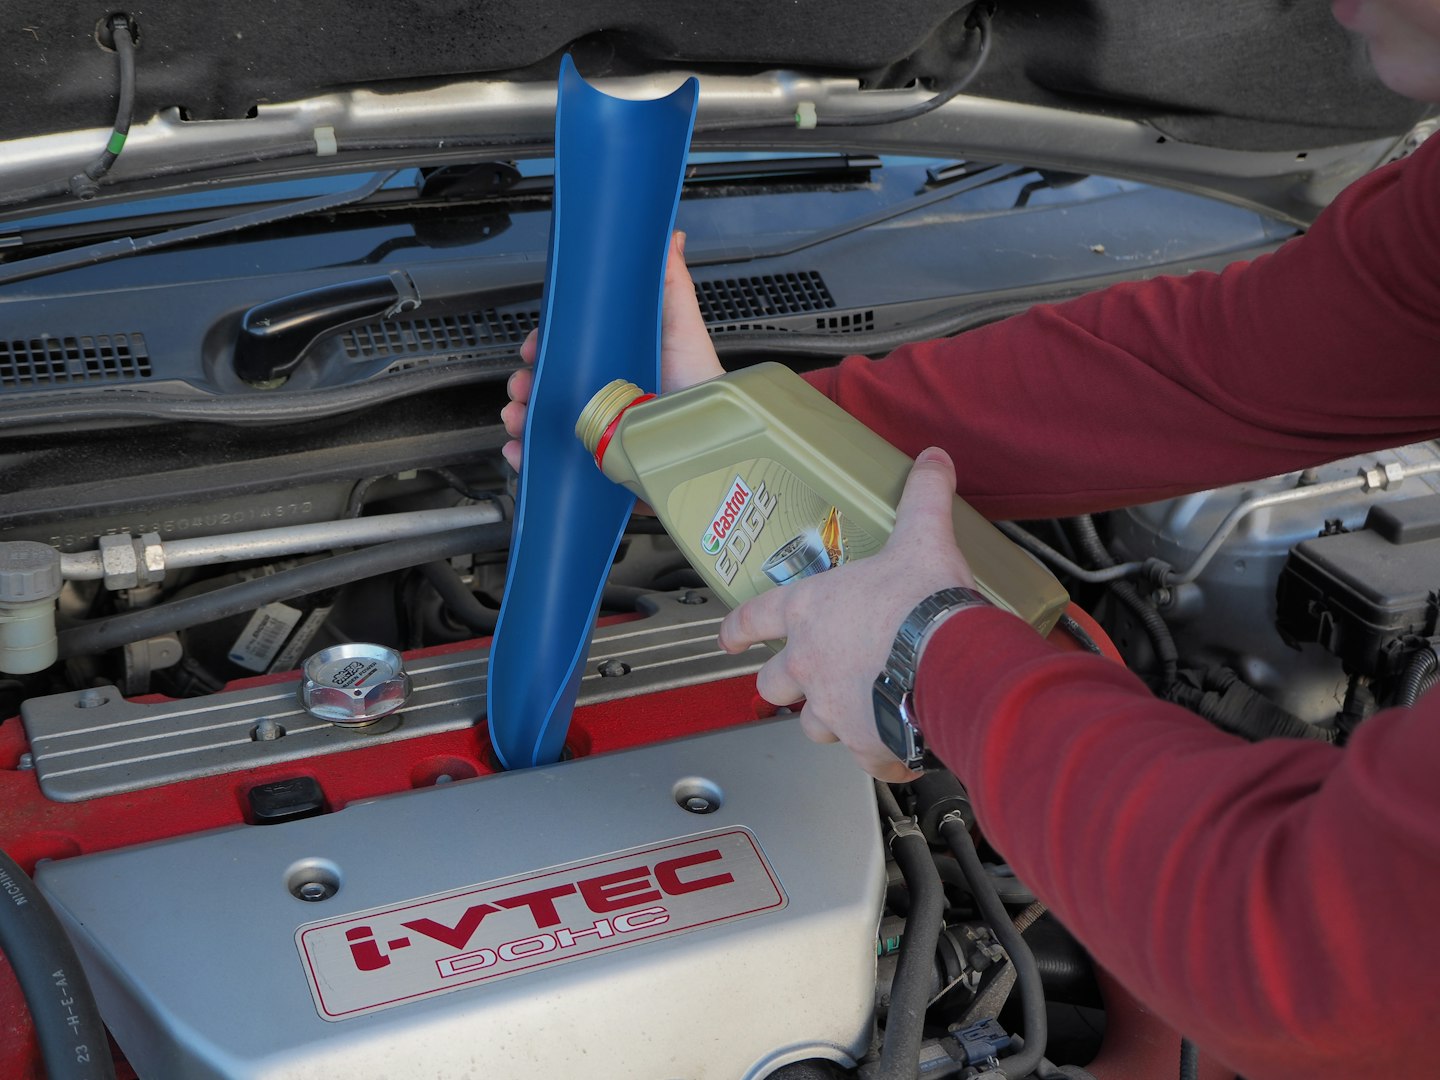 Filling the car's engine oil using the Draper funnel